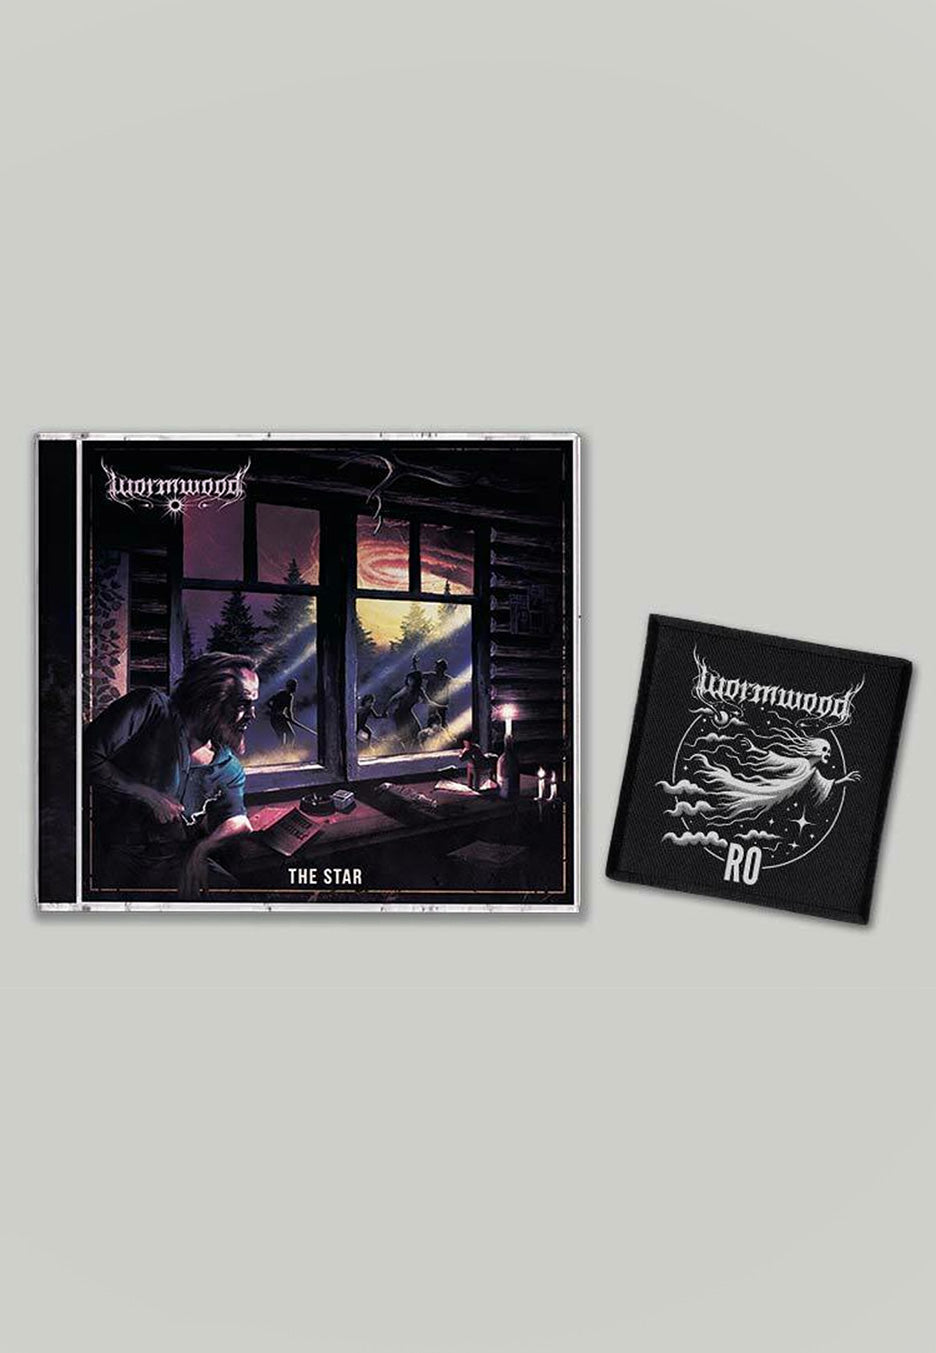 Wormwood - The Star Ltd. Edition - CD + Patch